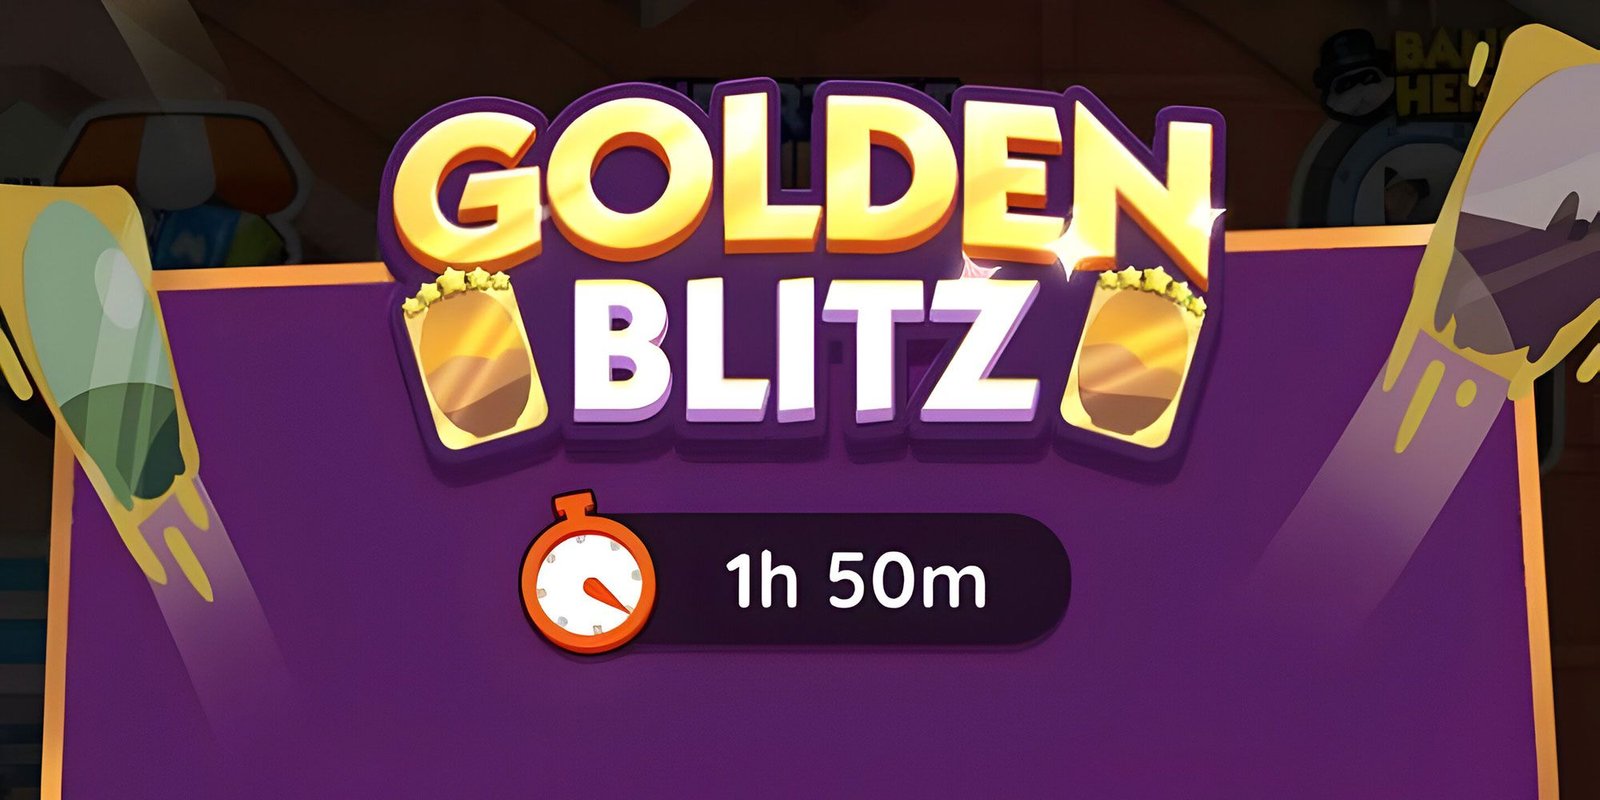 Part of the Golden Blitz event banner in Monopoly GO! showing an hour and fifty minutes left of the event.